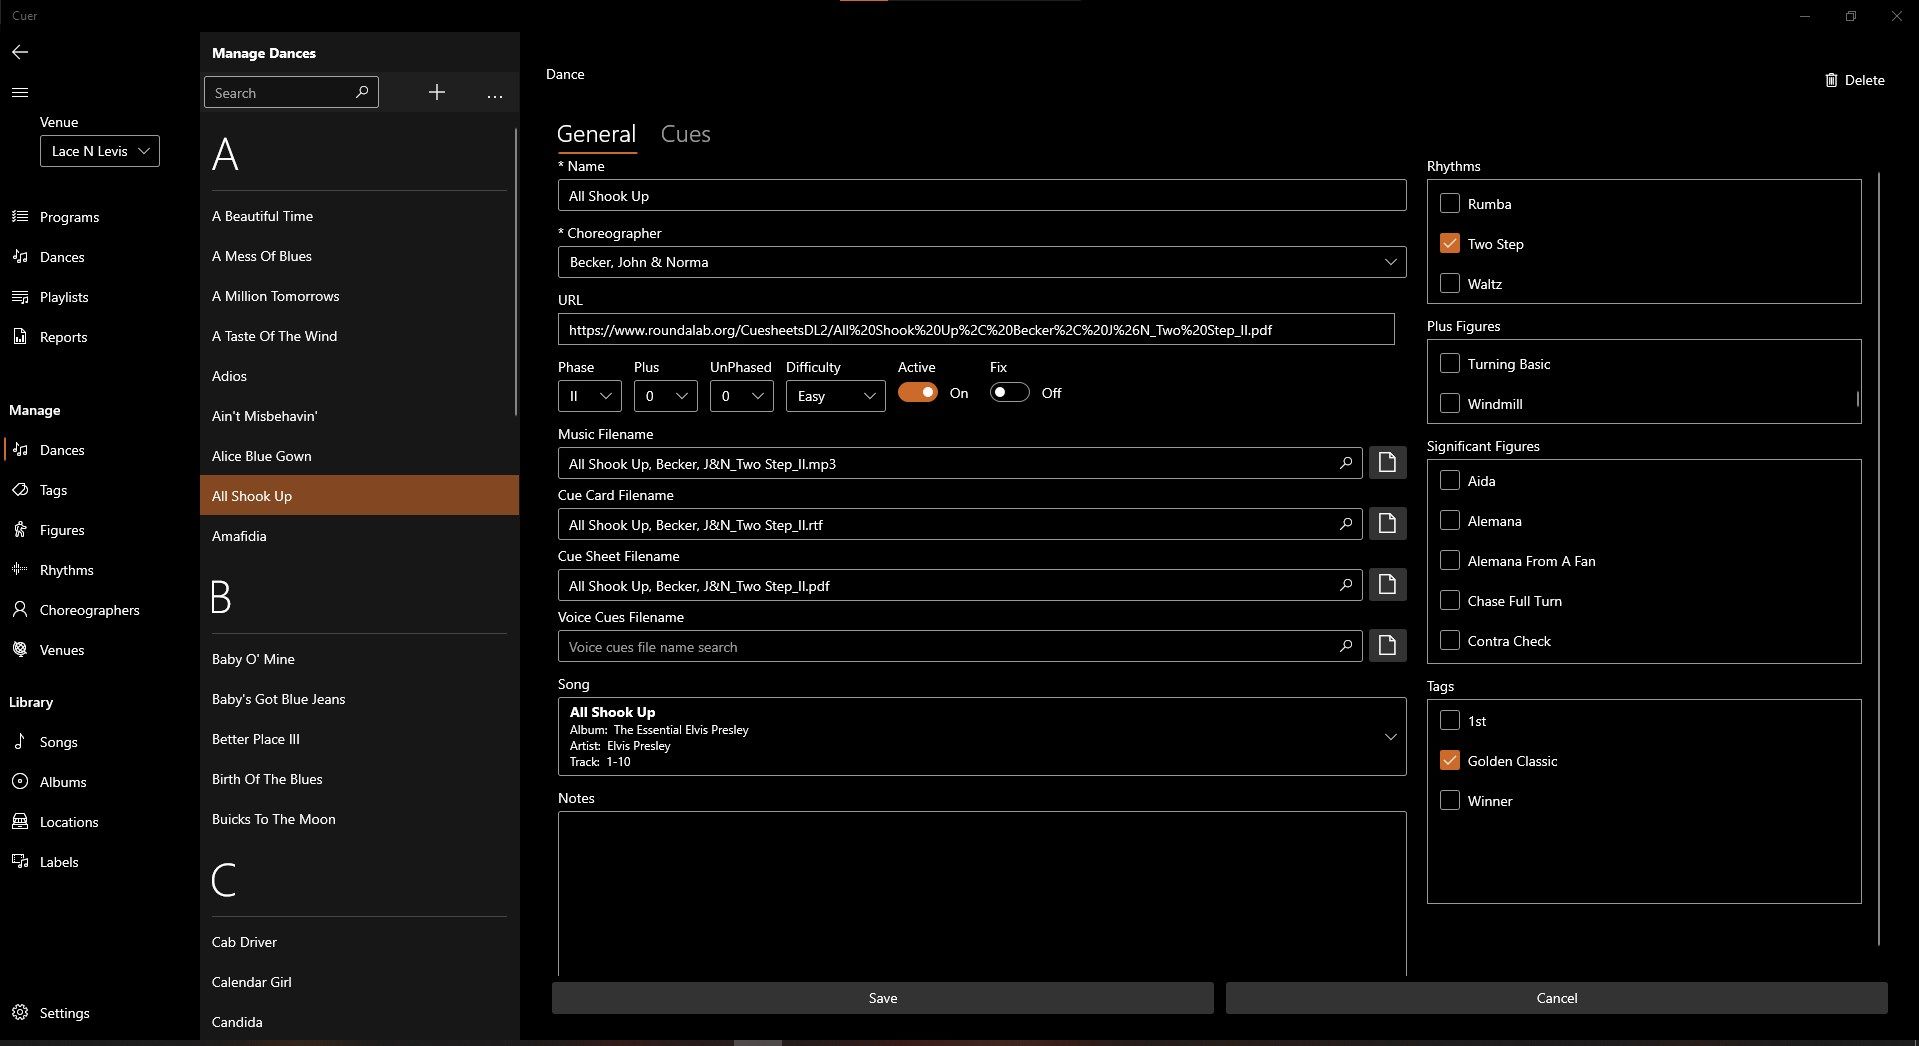 The manage dances page lets you add, edit and delete dances and their detailed information.